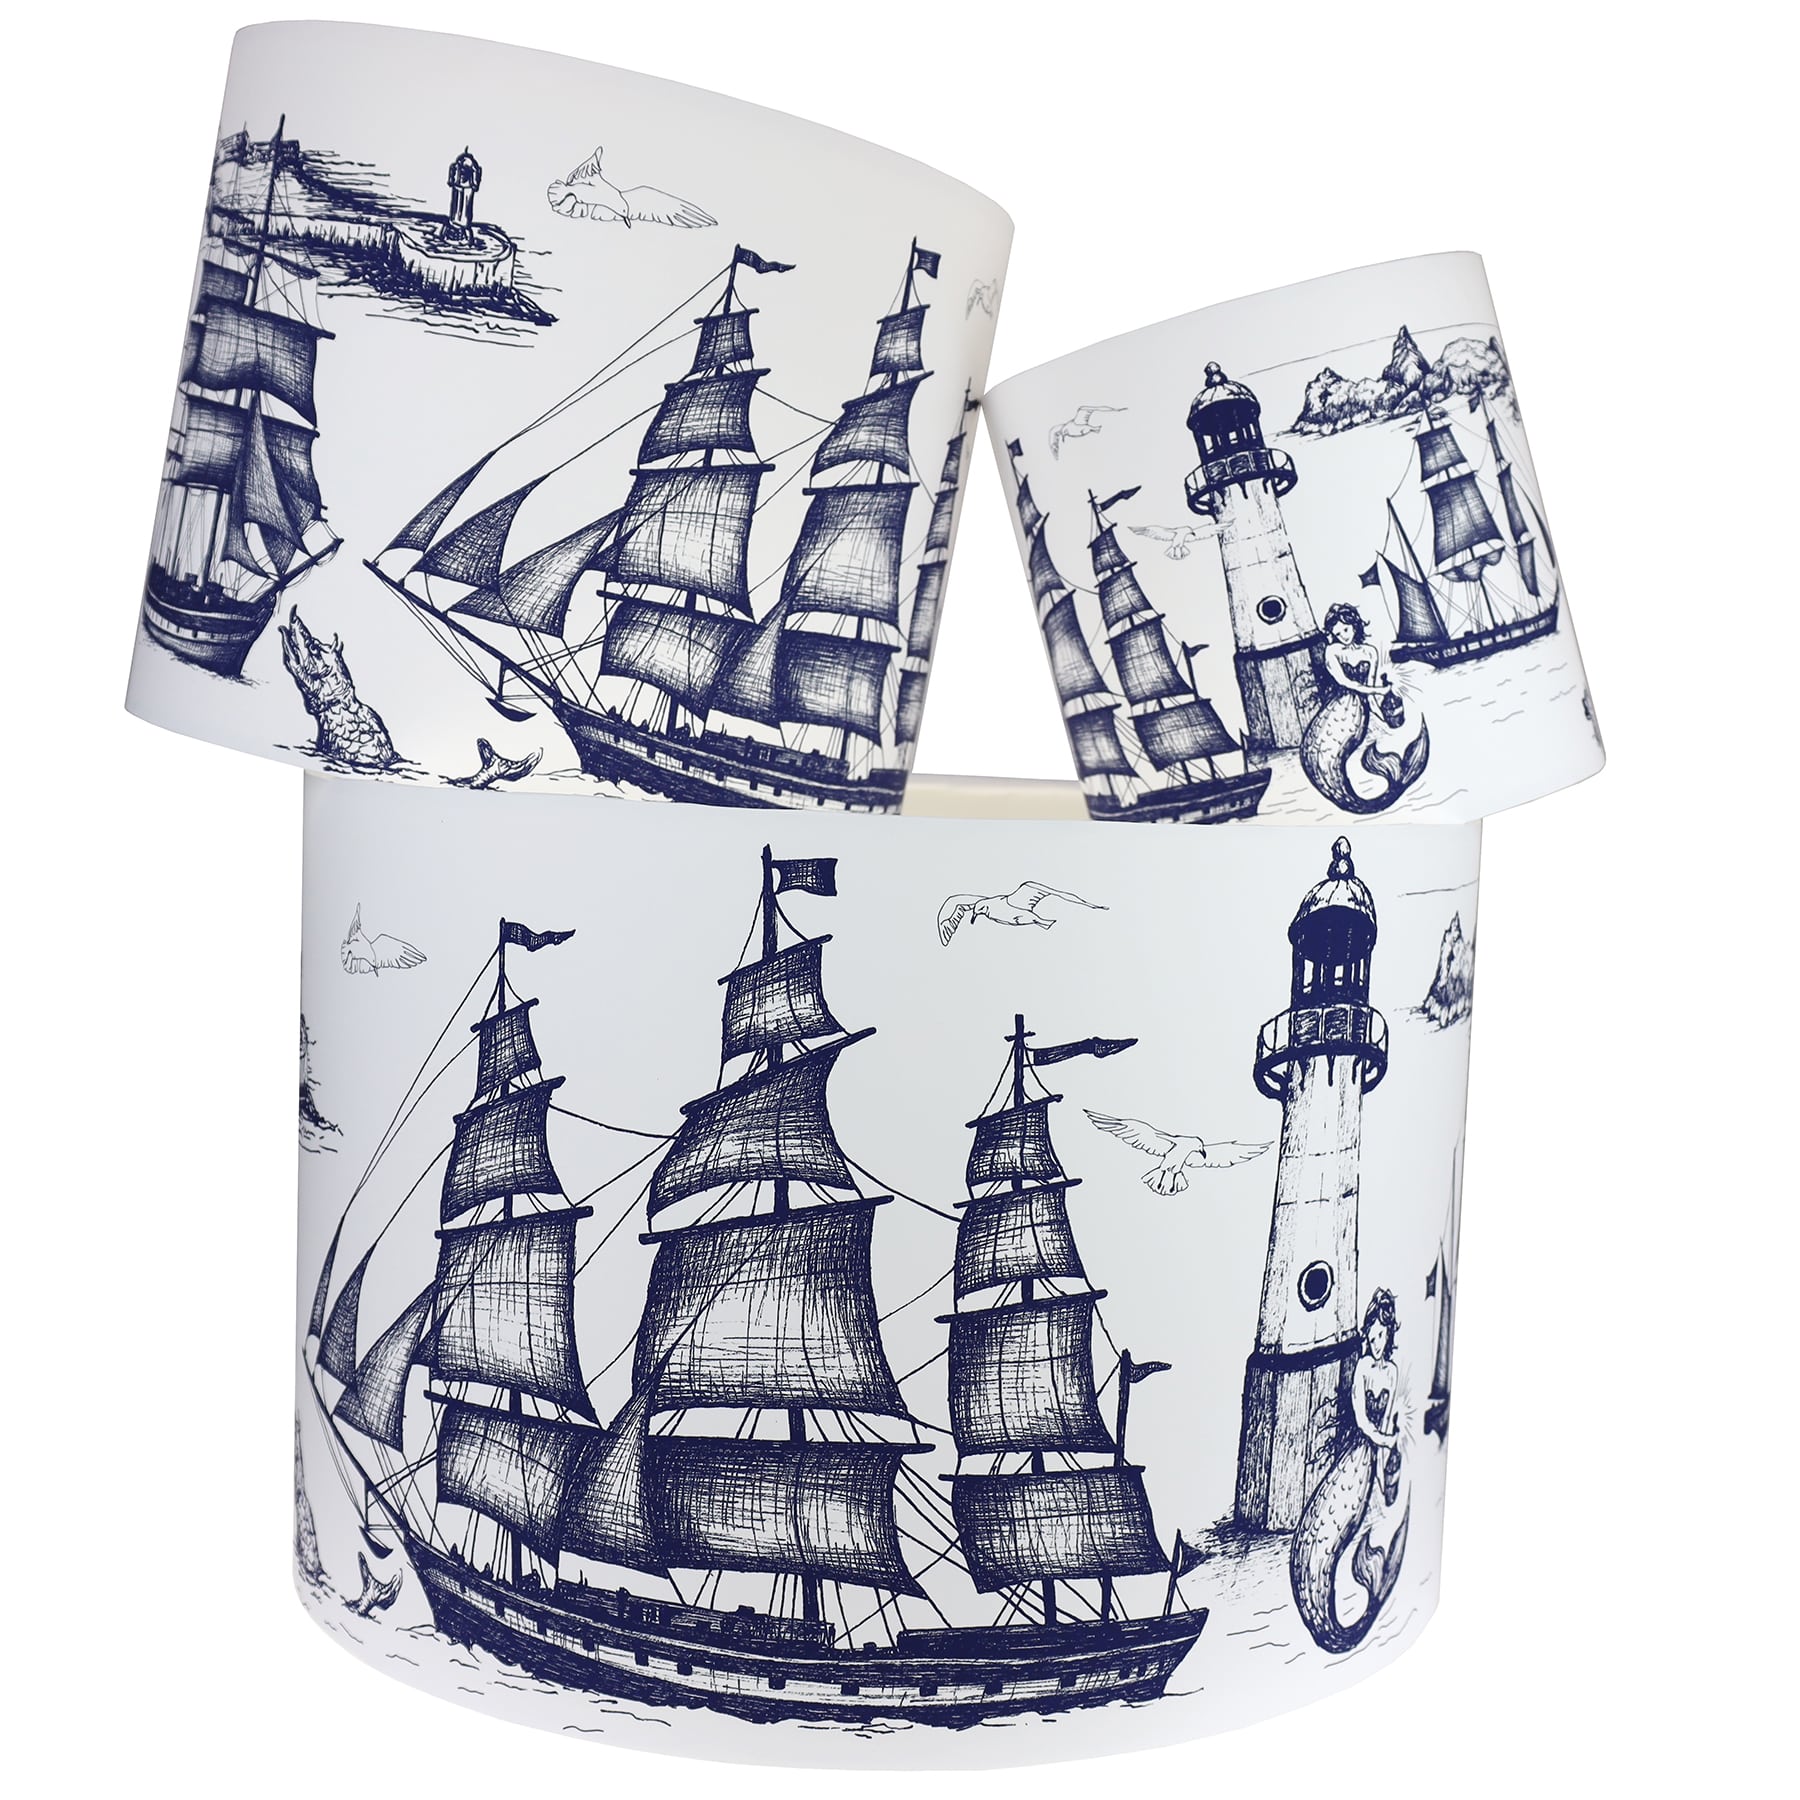 Our Classic Navy Maritime design on a white background.The lampshades are shown in a stack of three showing all three sizes.